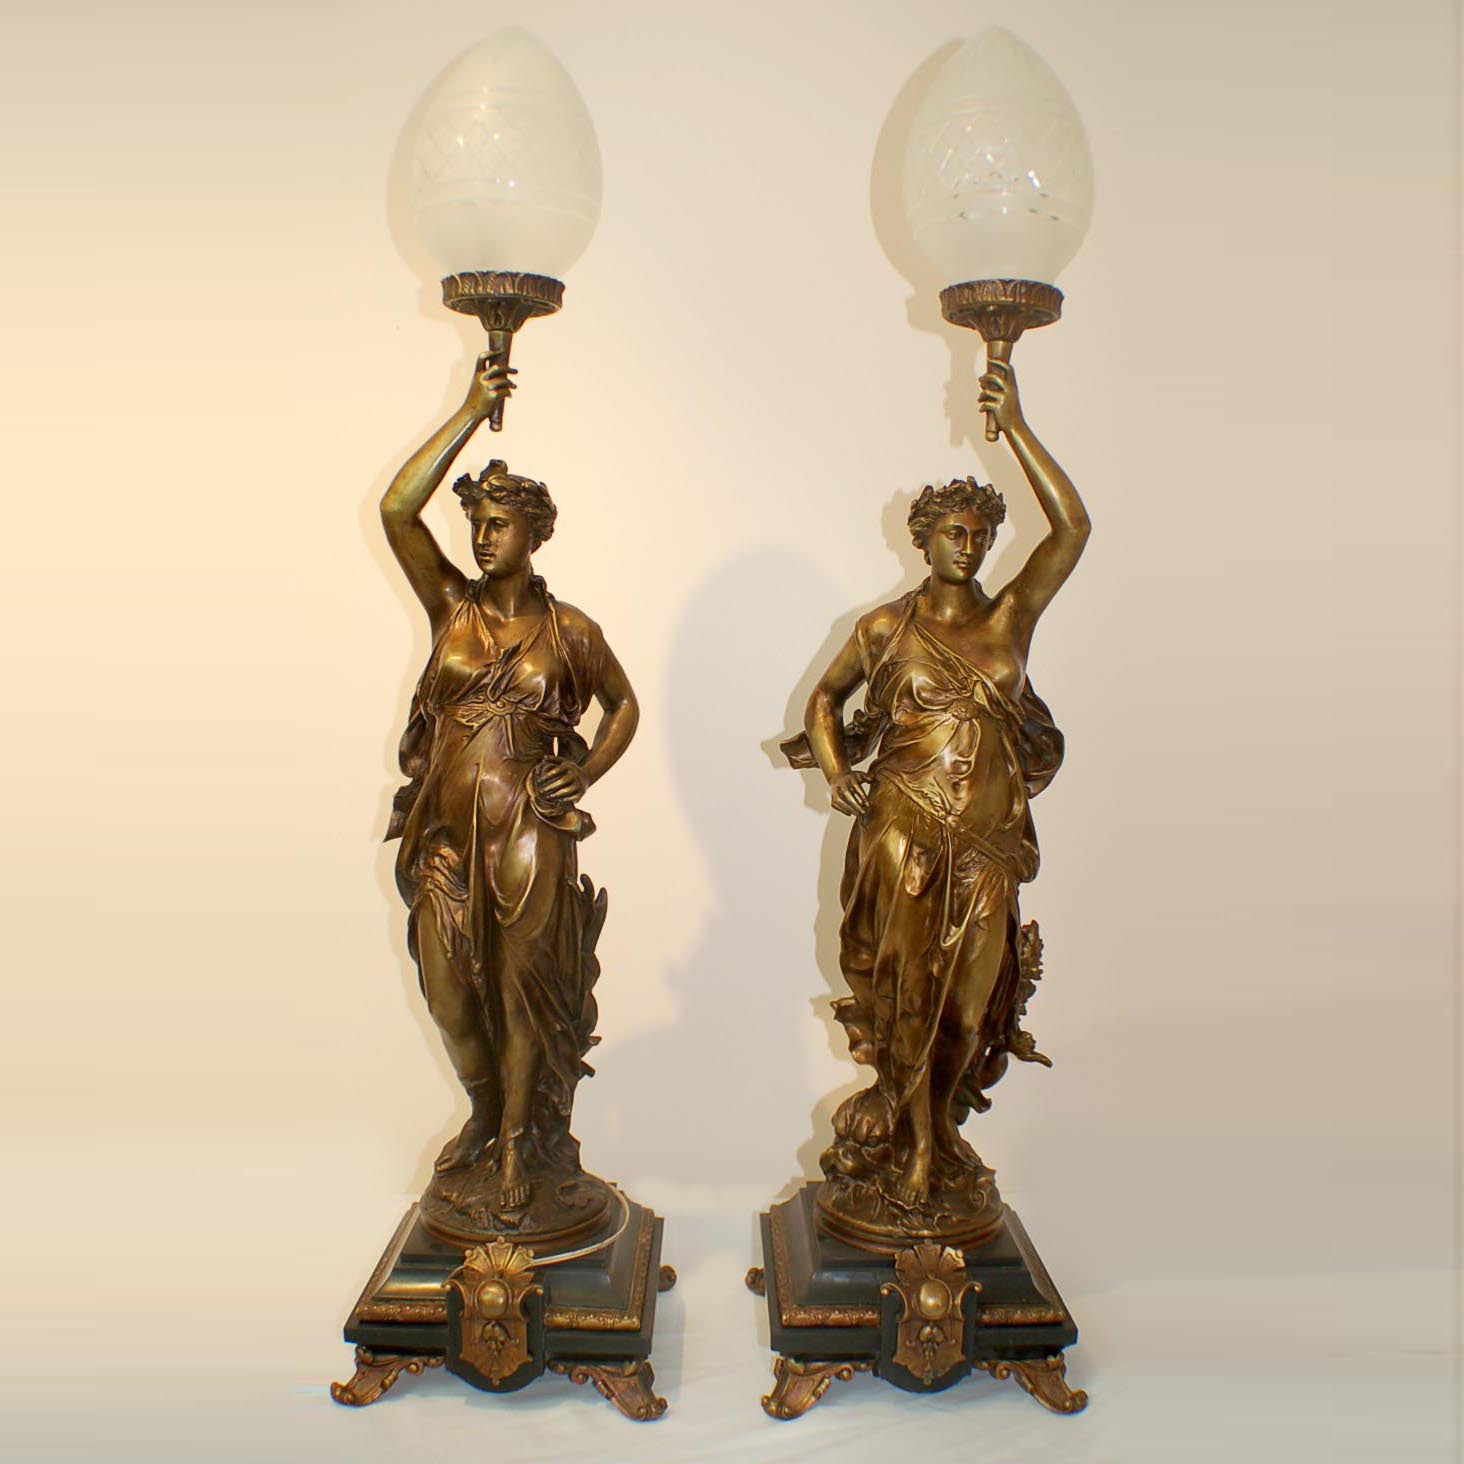 A pair of figure lamps